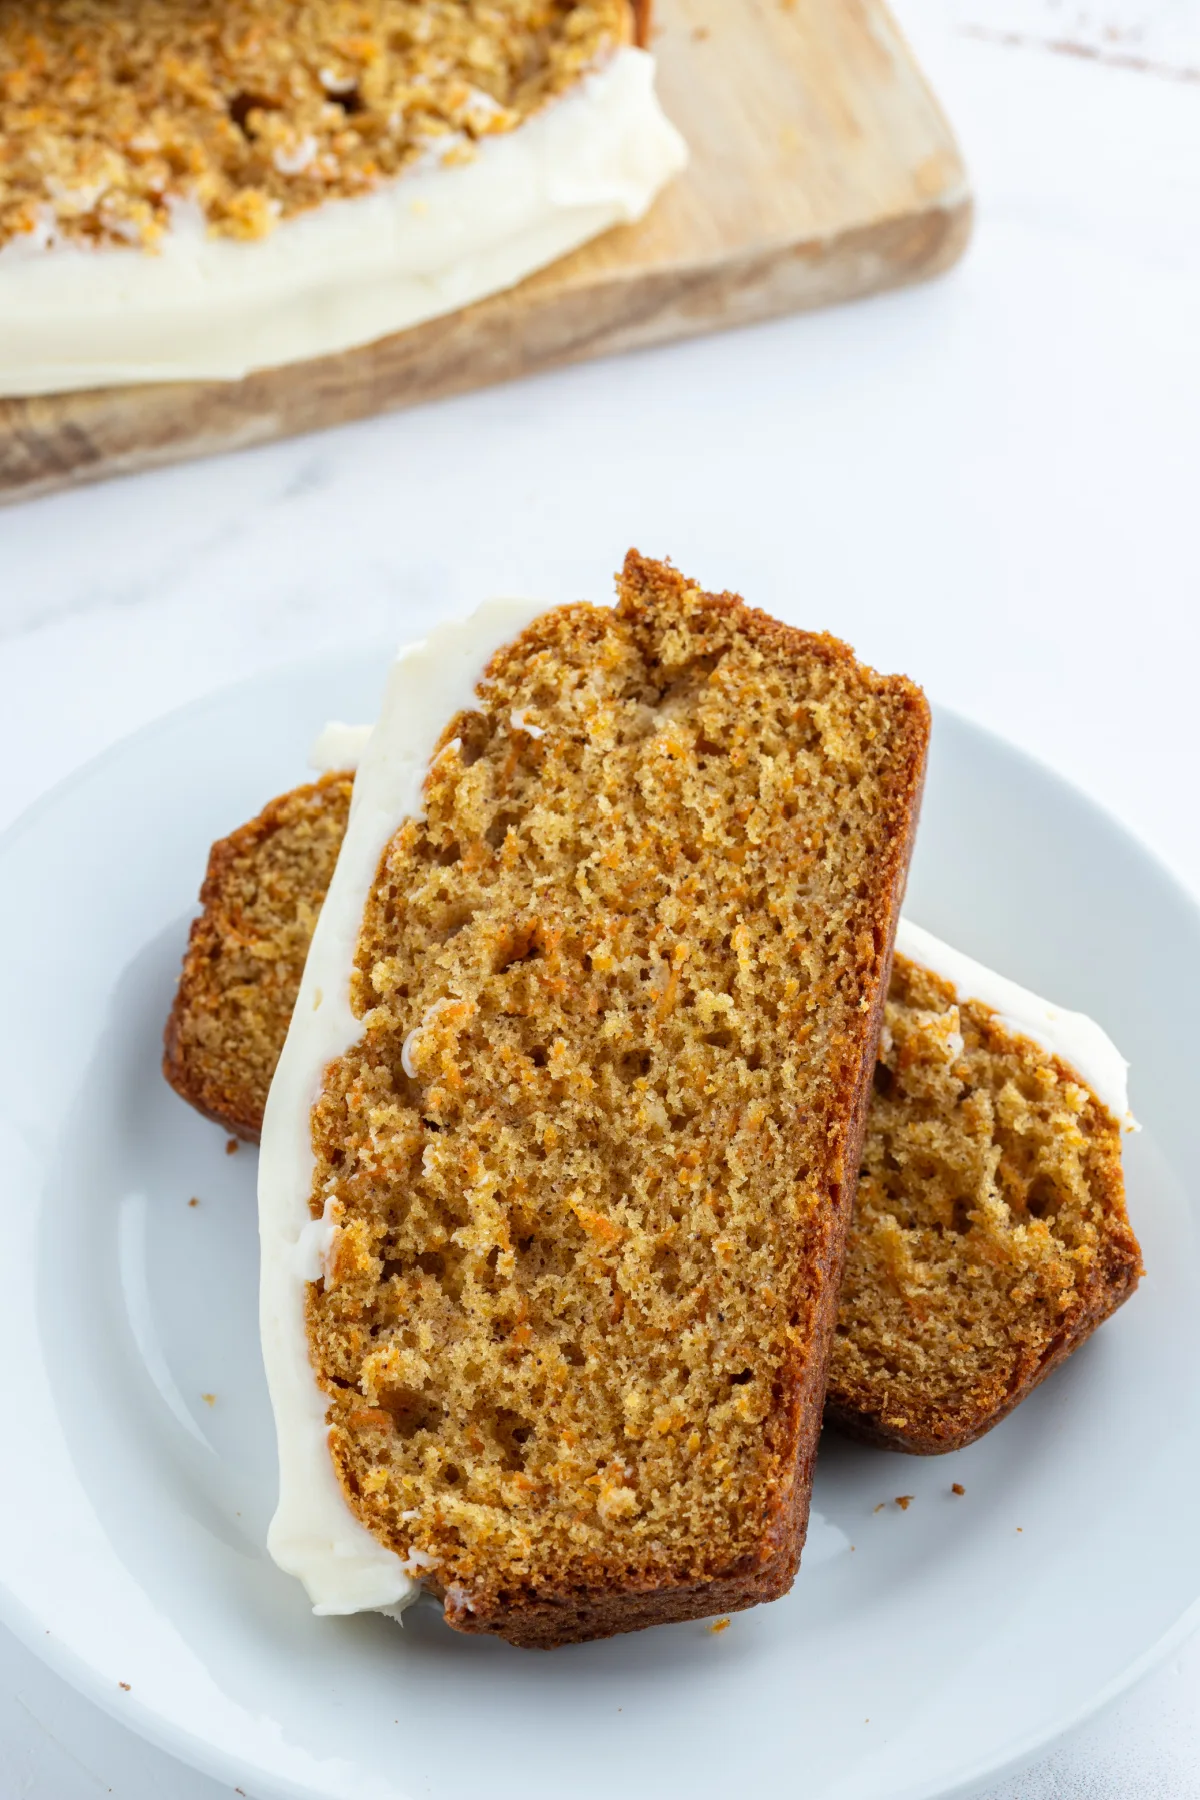 slices of carrot loaf cake on plate